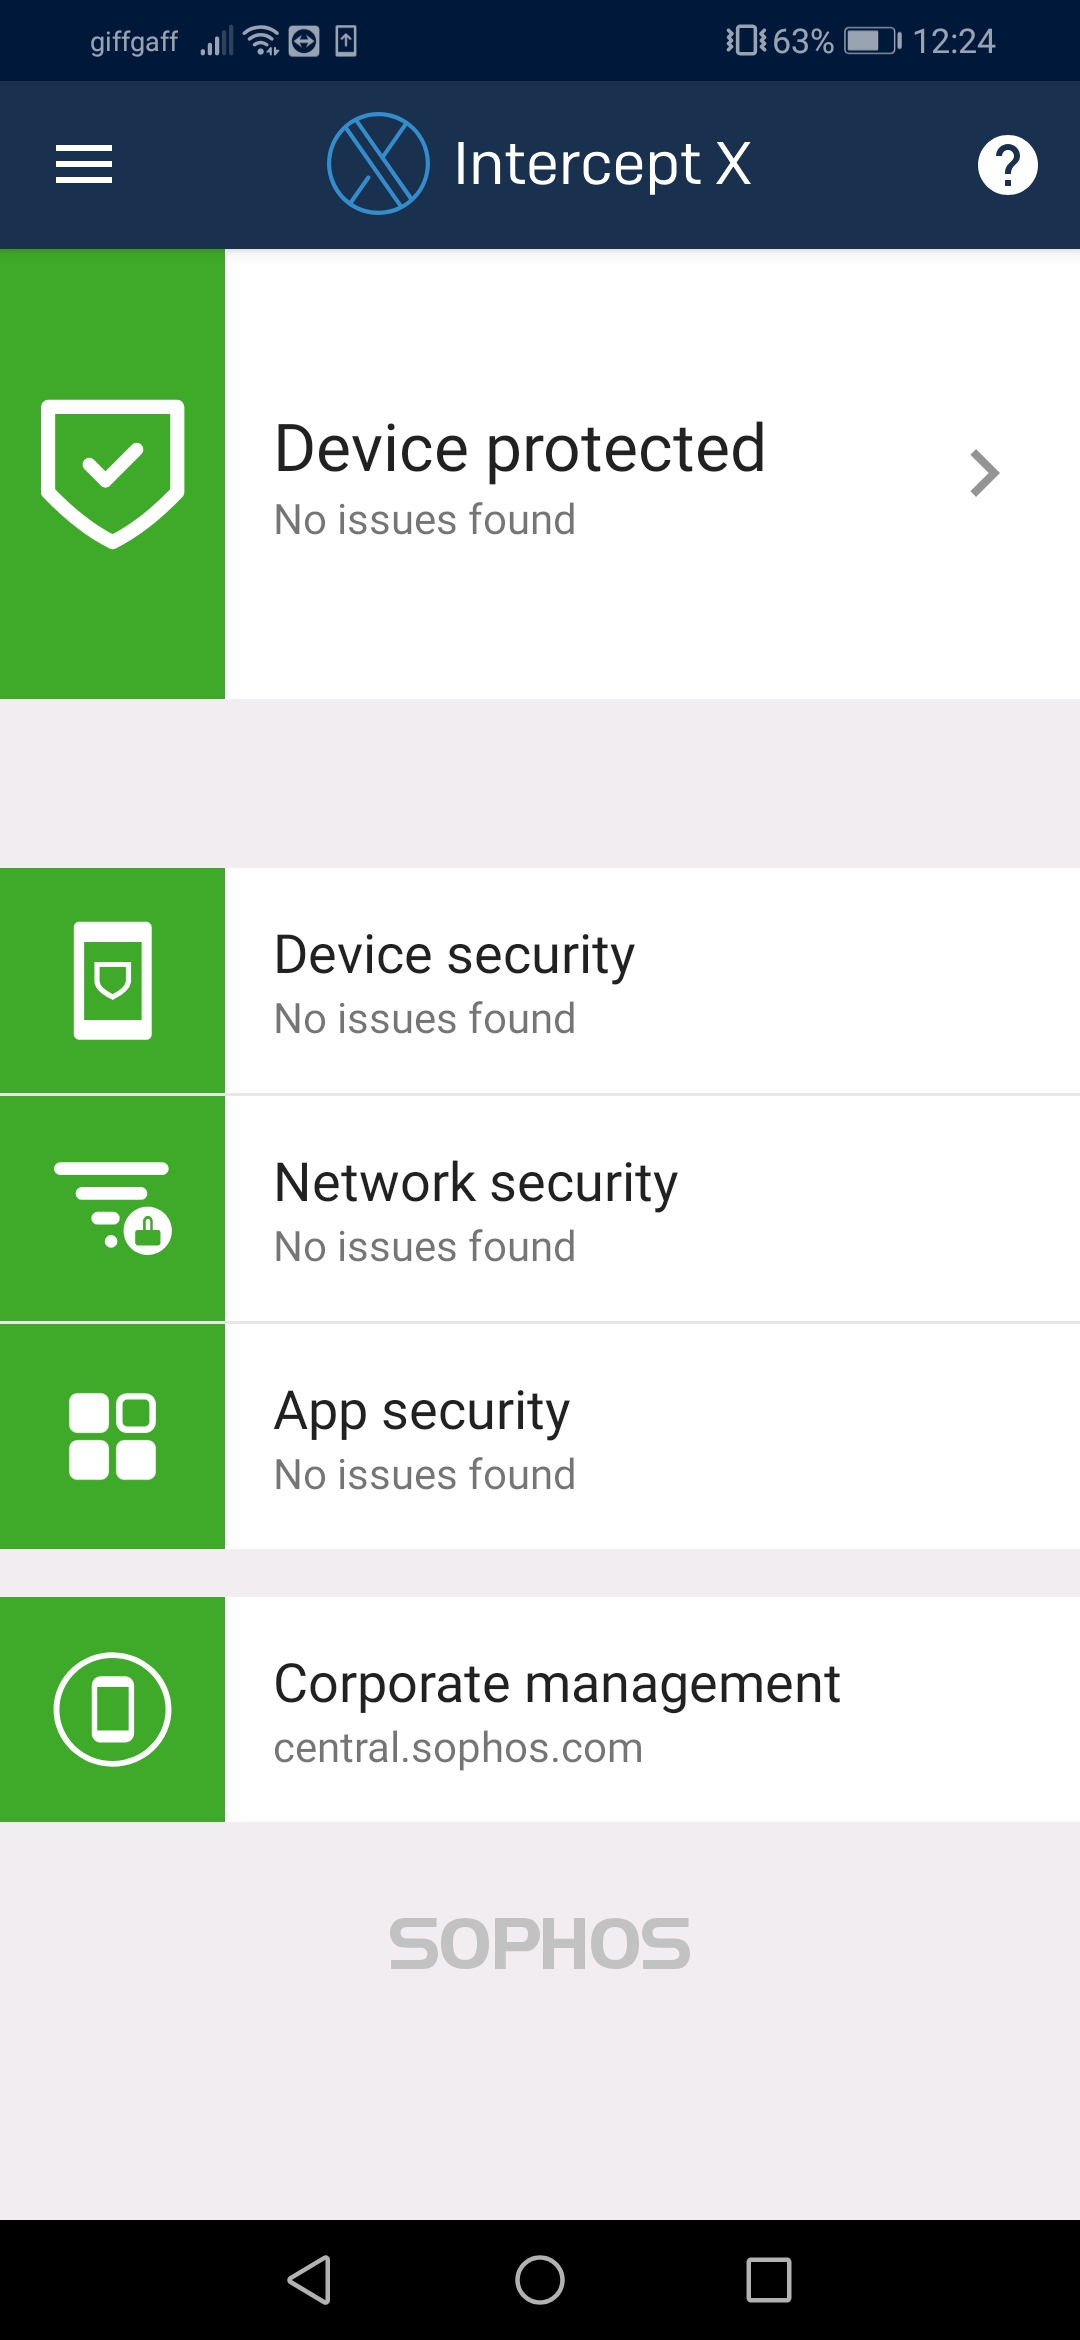 Sophos Intercept X for Mobile - Android Device Overview